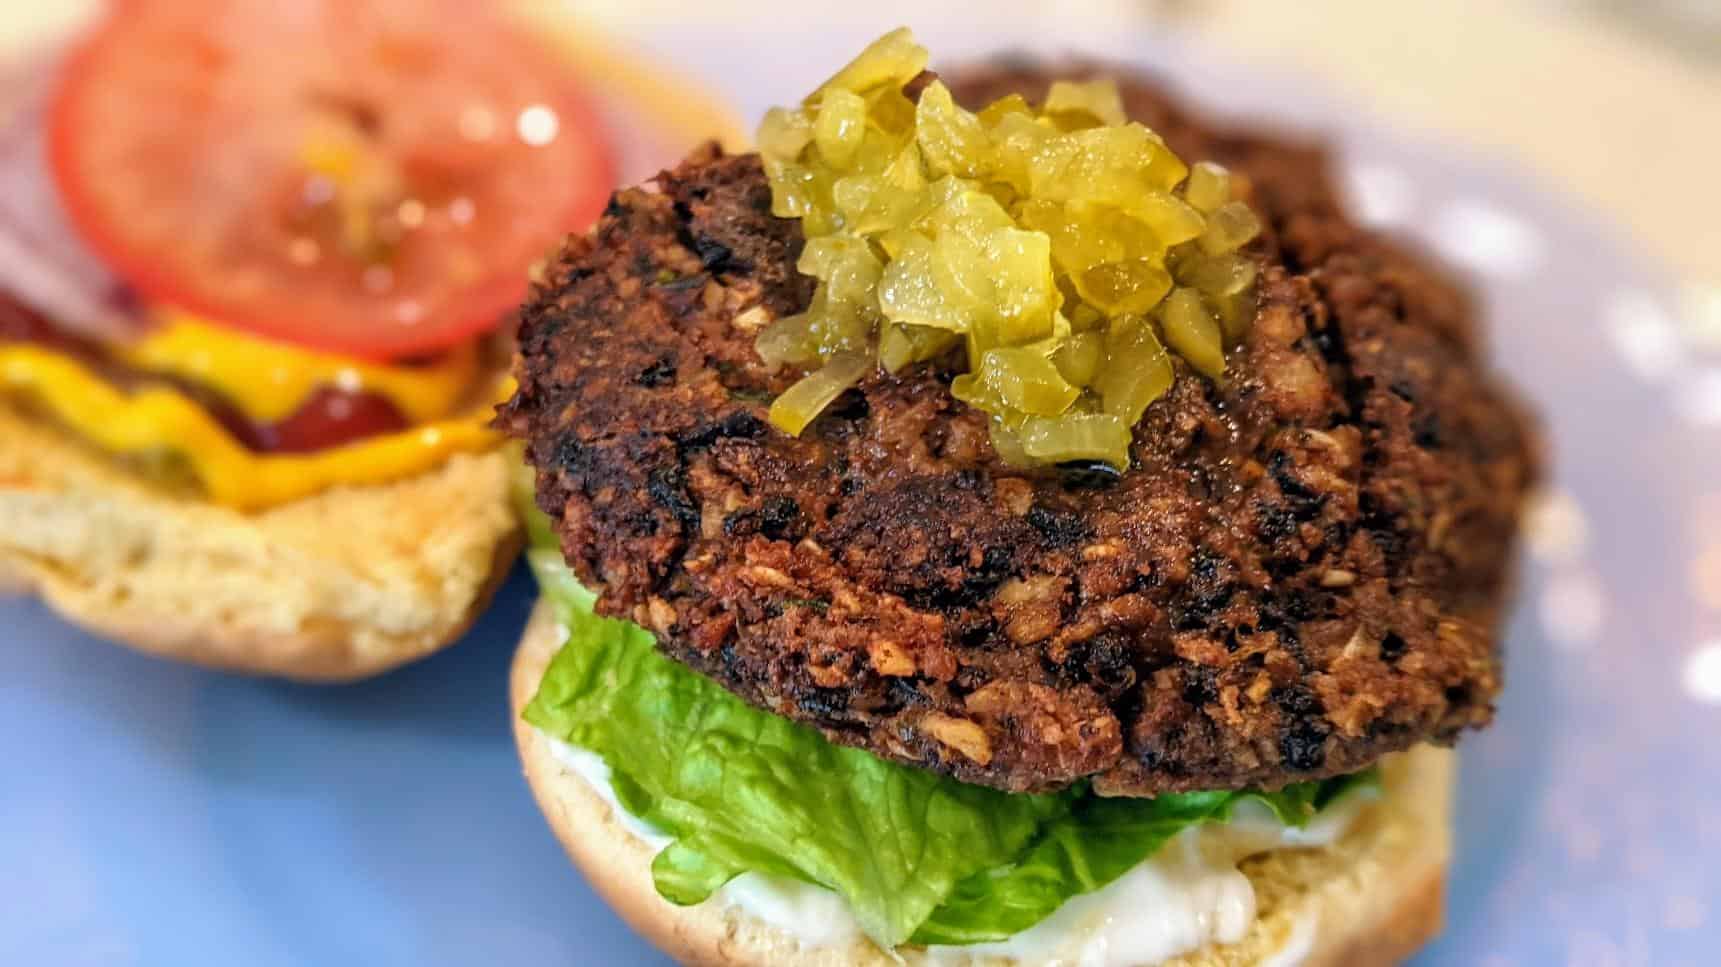  Take a bite of the Wild West with these plant-based burgers.